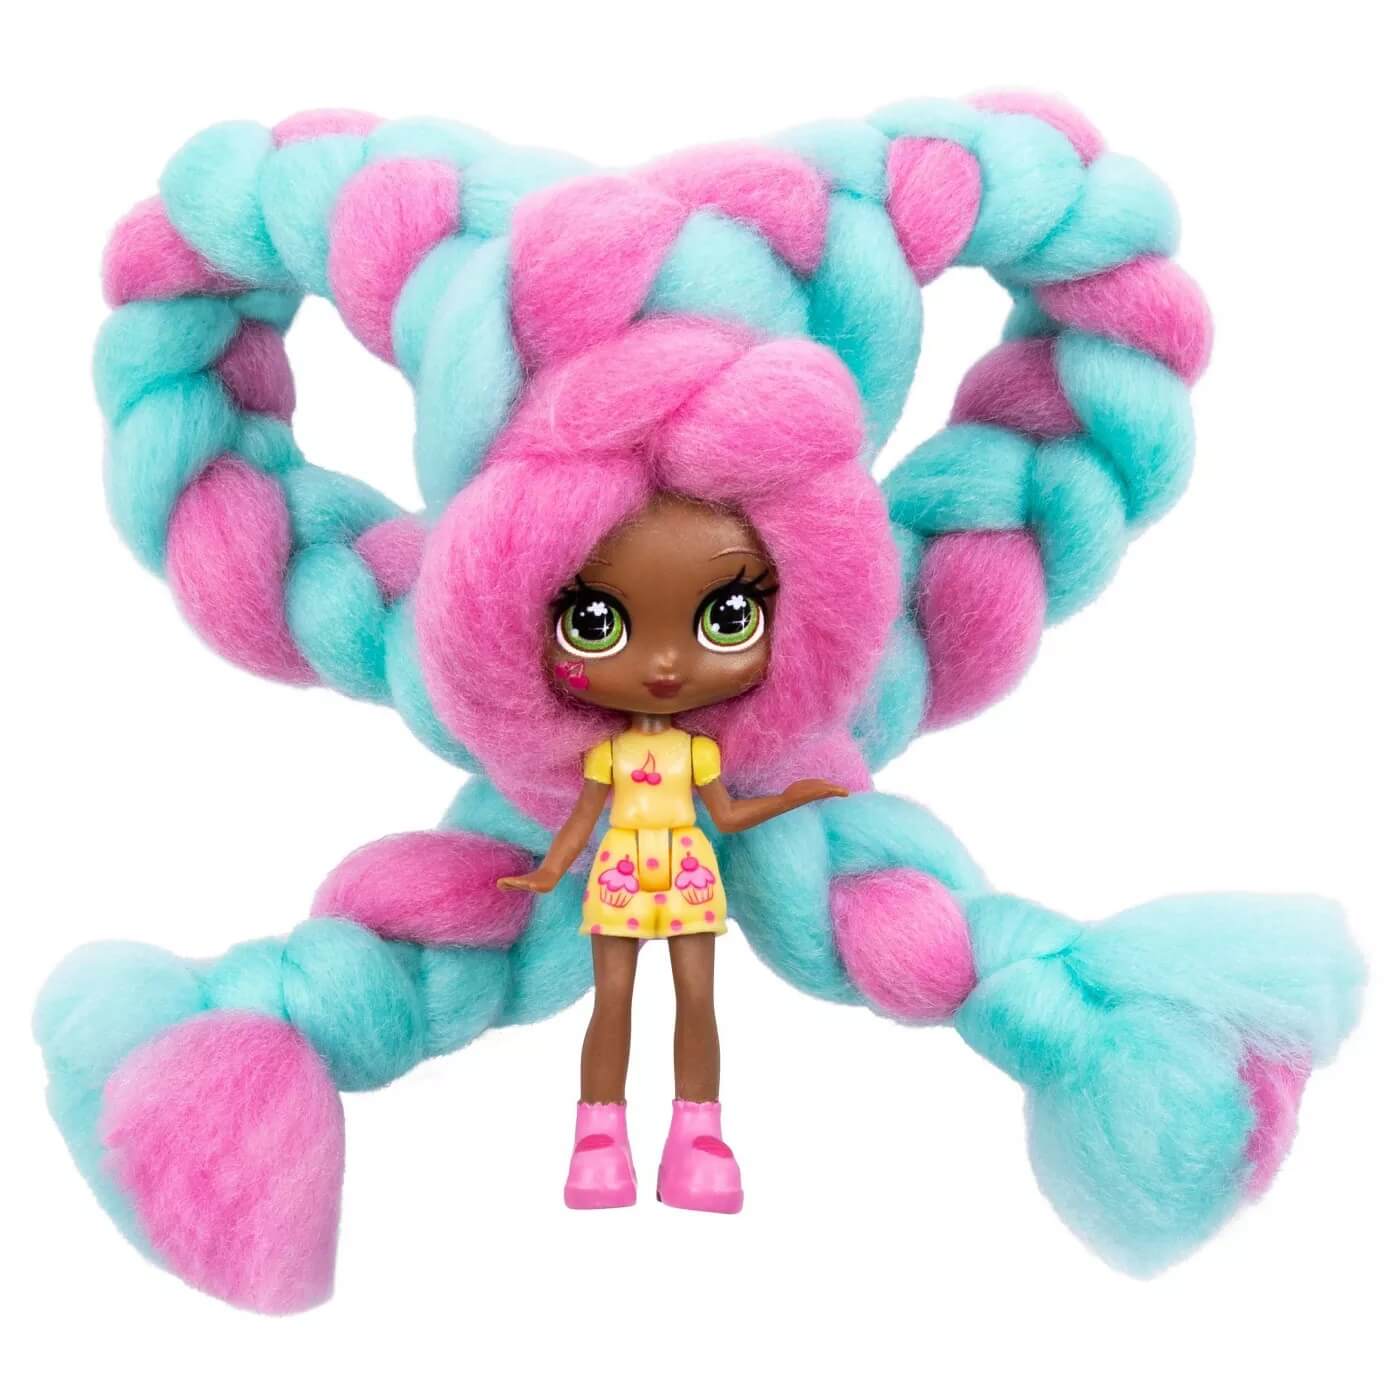 Candylocks Surprise Collectible Scented Doll (Styles Vary)